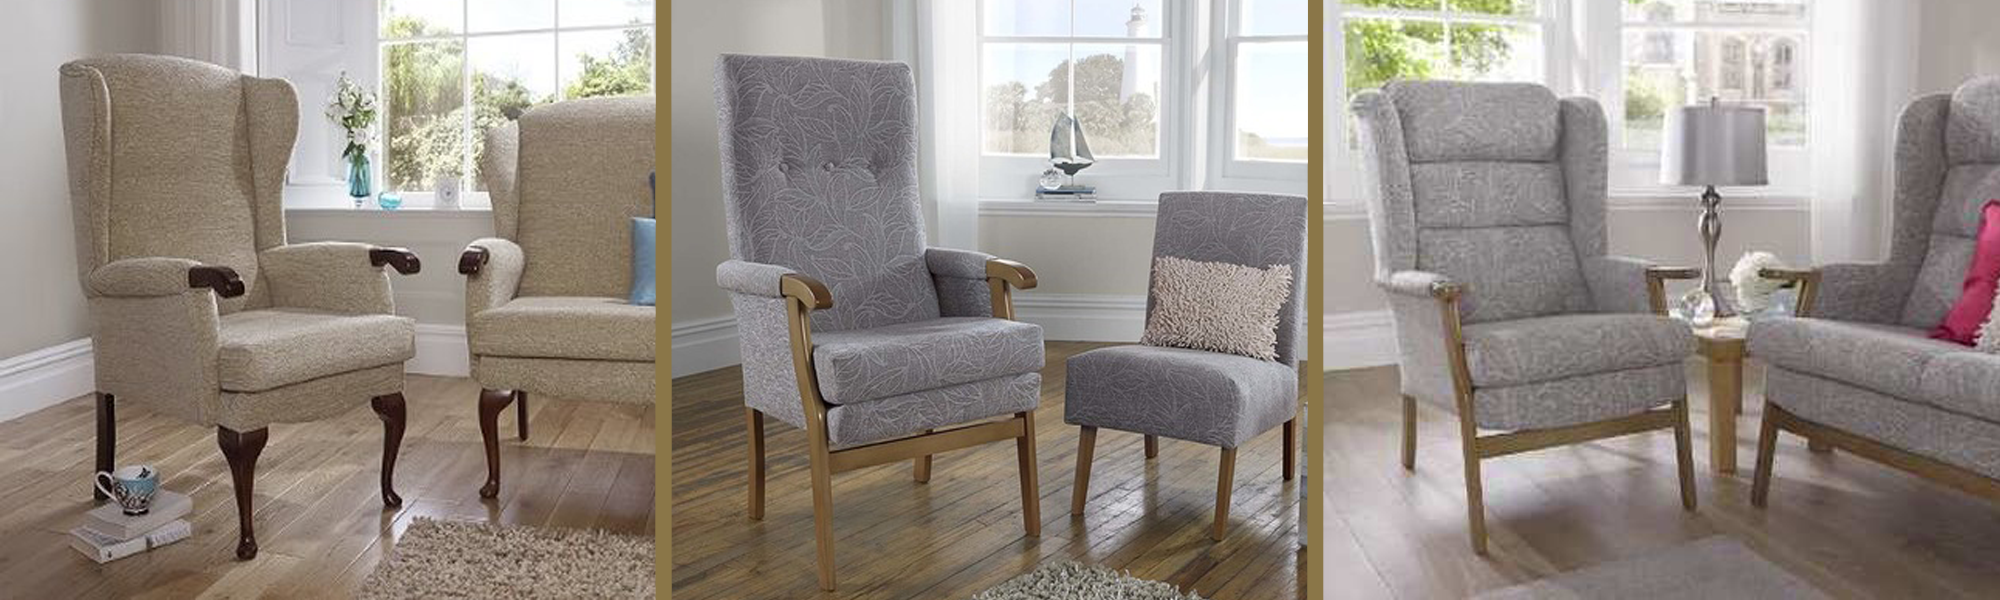 Fabric High Seat Chairs